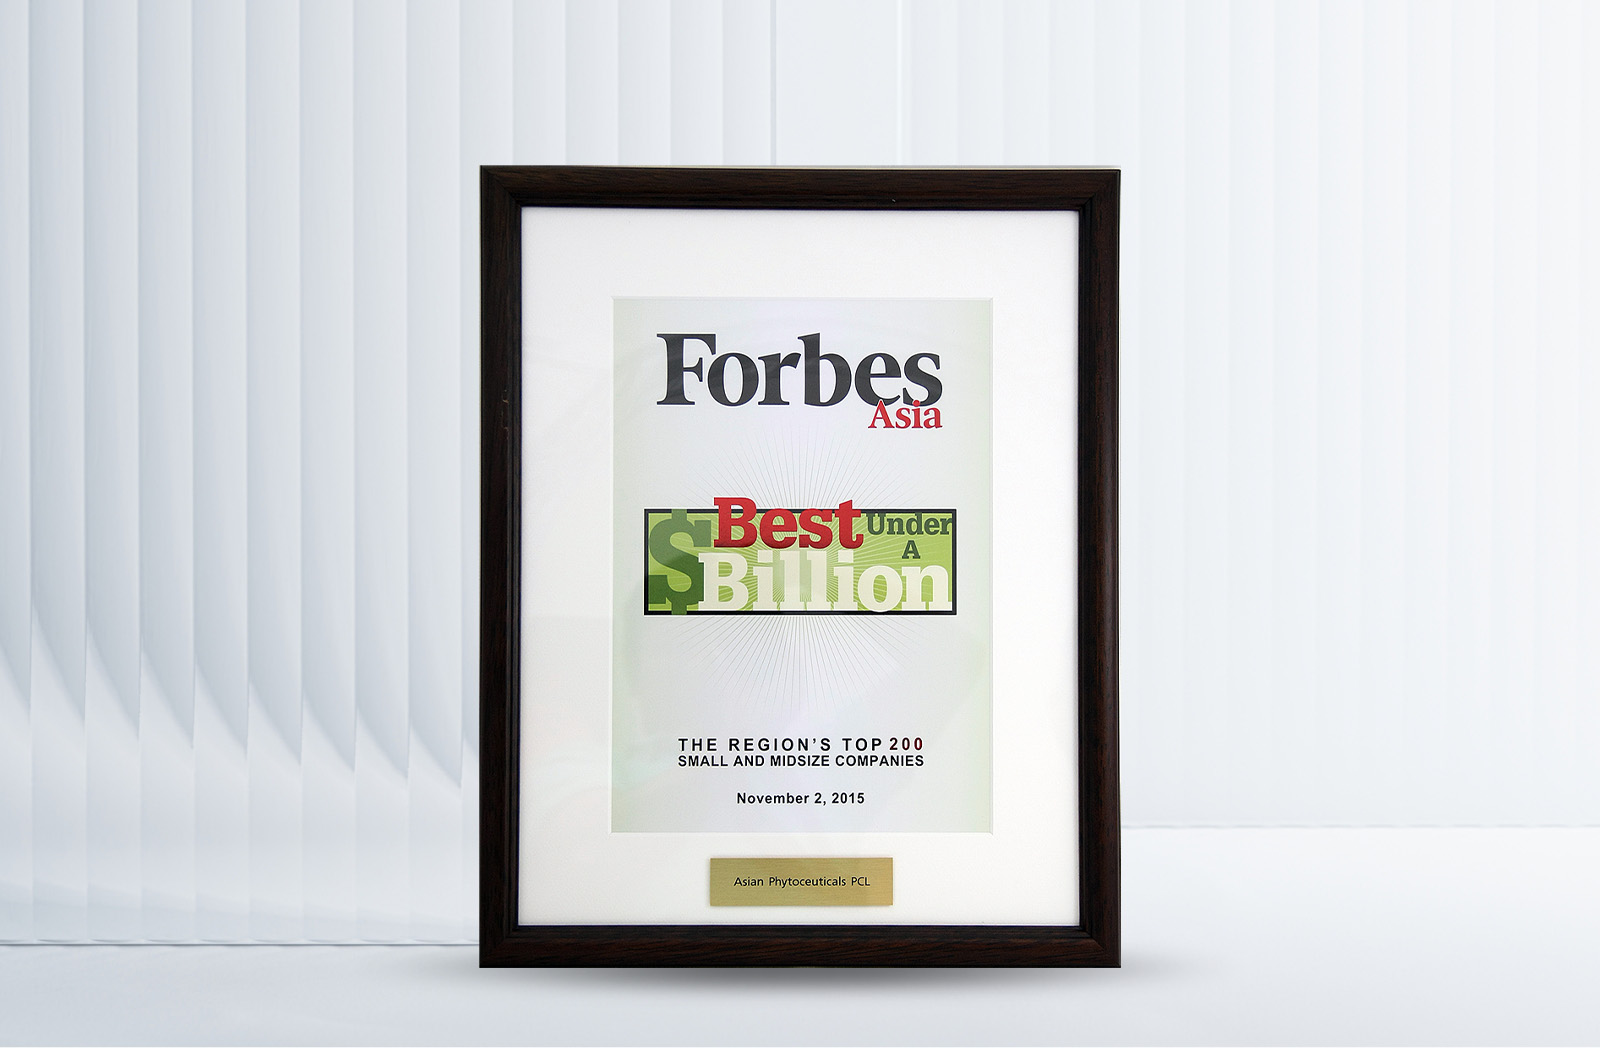 APCO Receives “Best Under A Billion” Award from Forbes Asia 2015